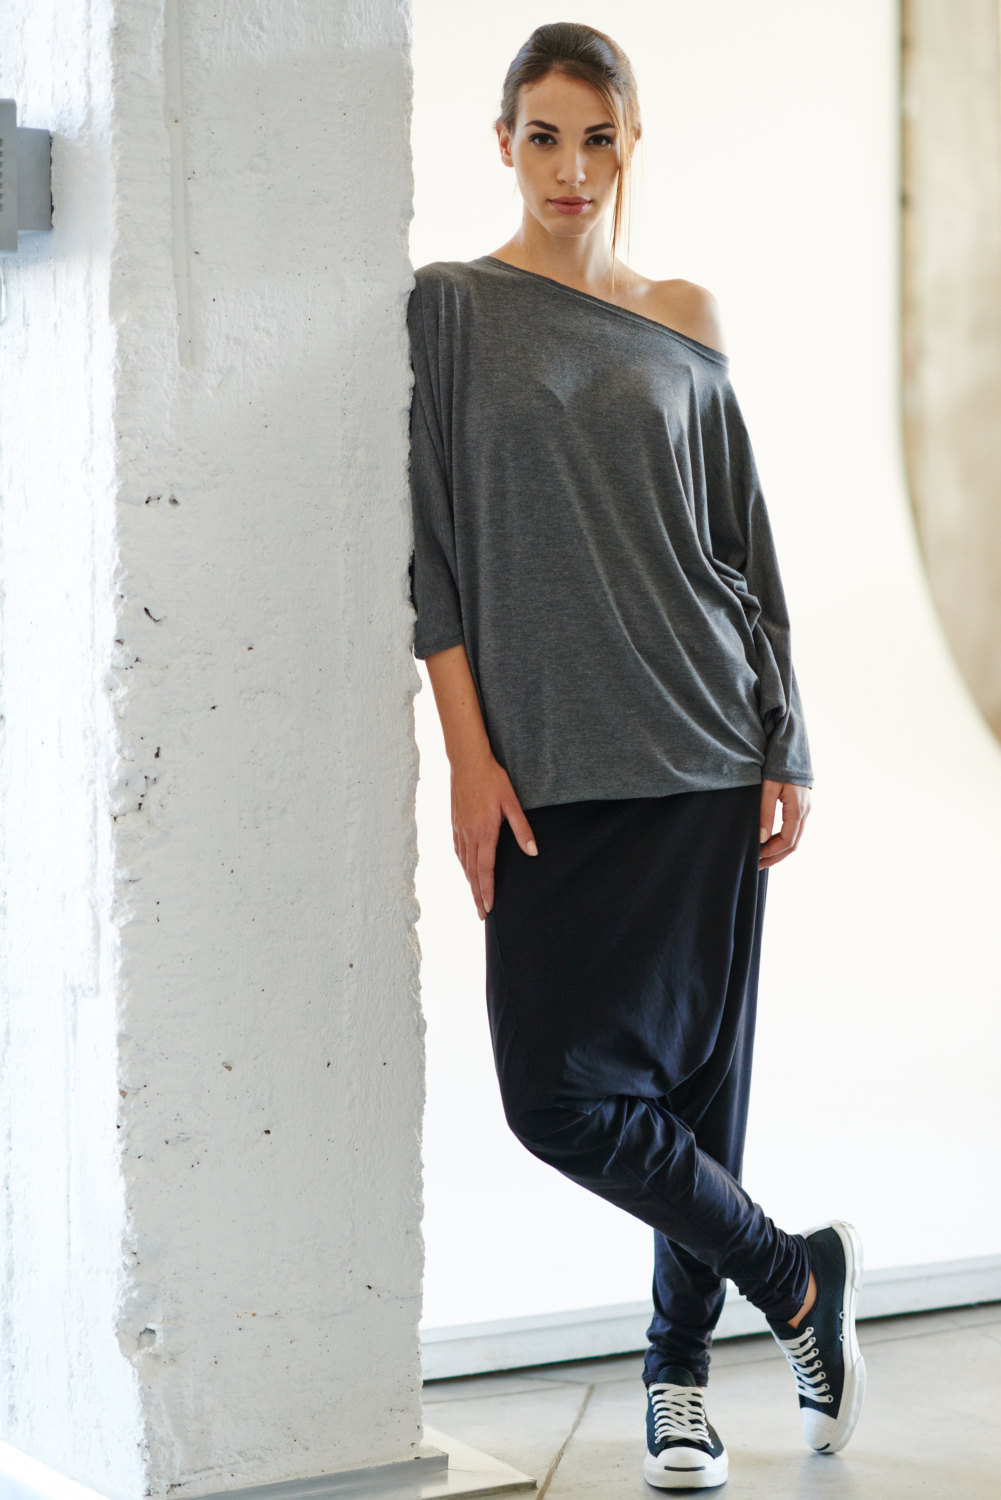 Loose Gray Тop / Oversized Cotton Blouse / Casual Top / Bat-winged Grey Flannel Top By Arya Sense